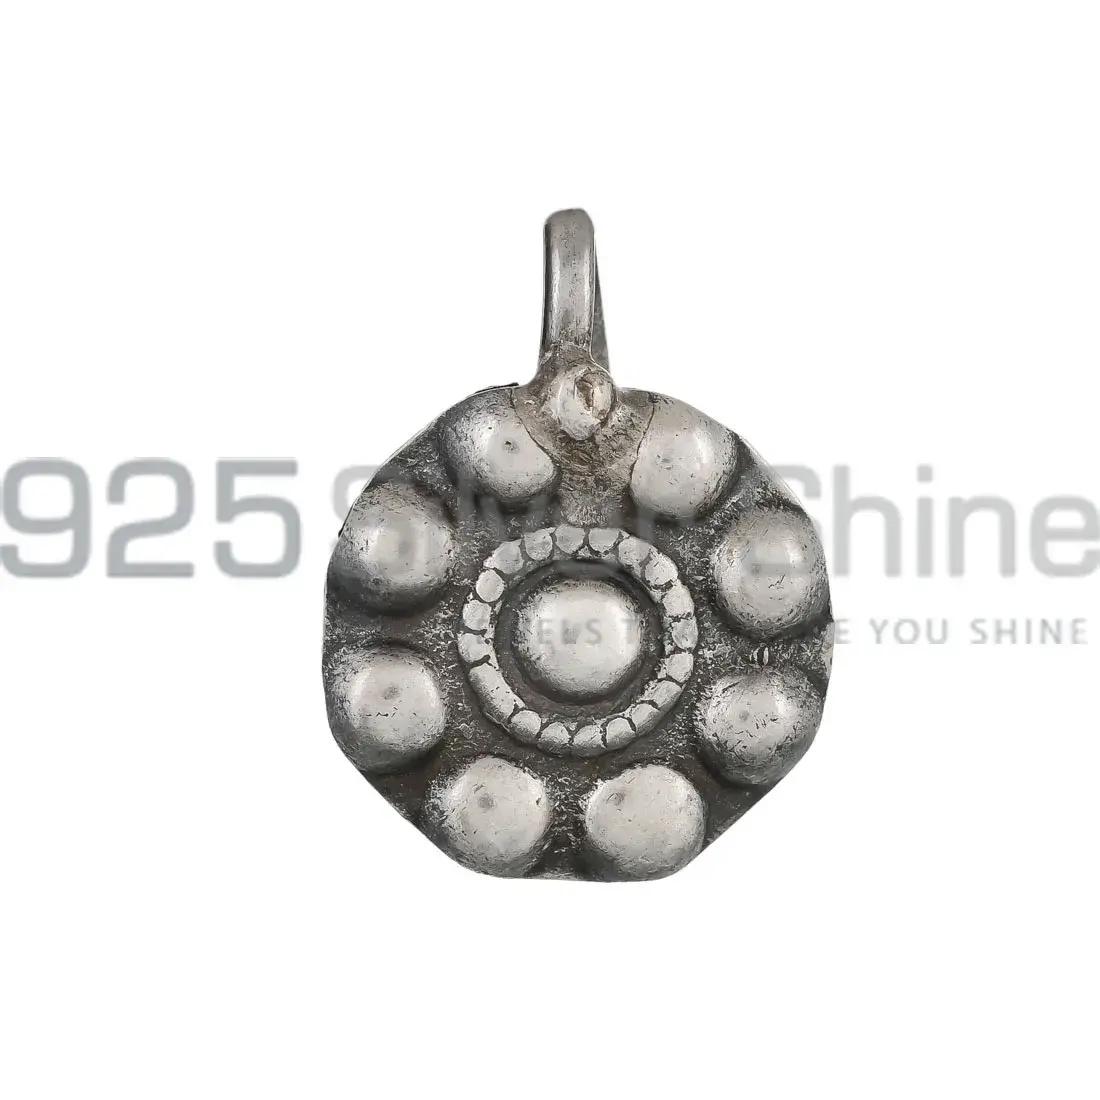 Unique 925 Sterling Silver Nose Pin 925NP10